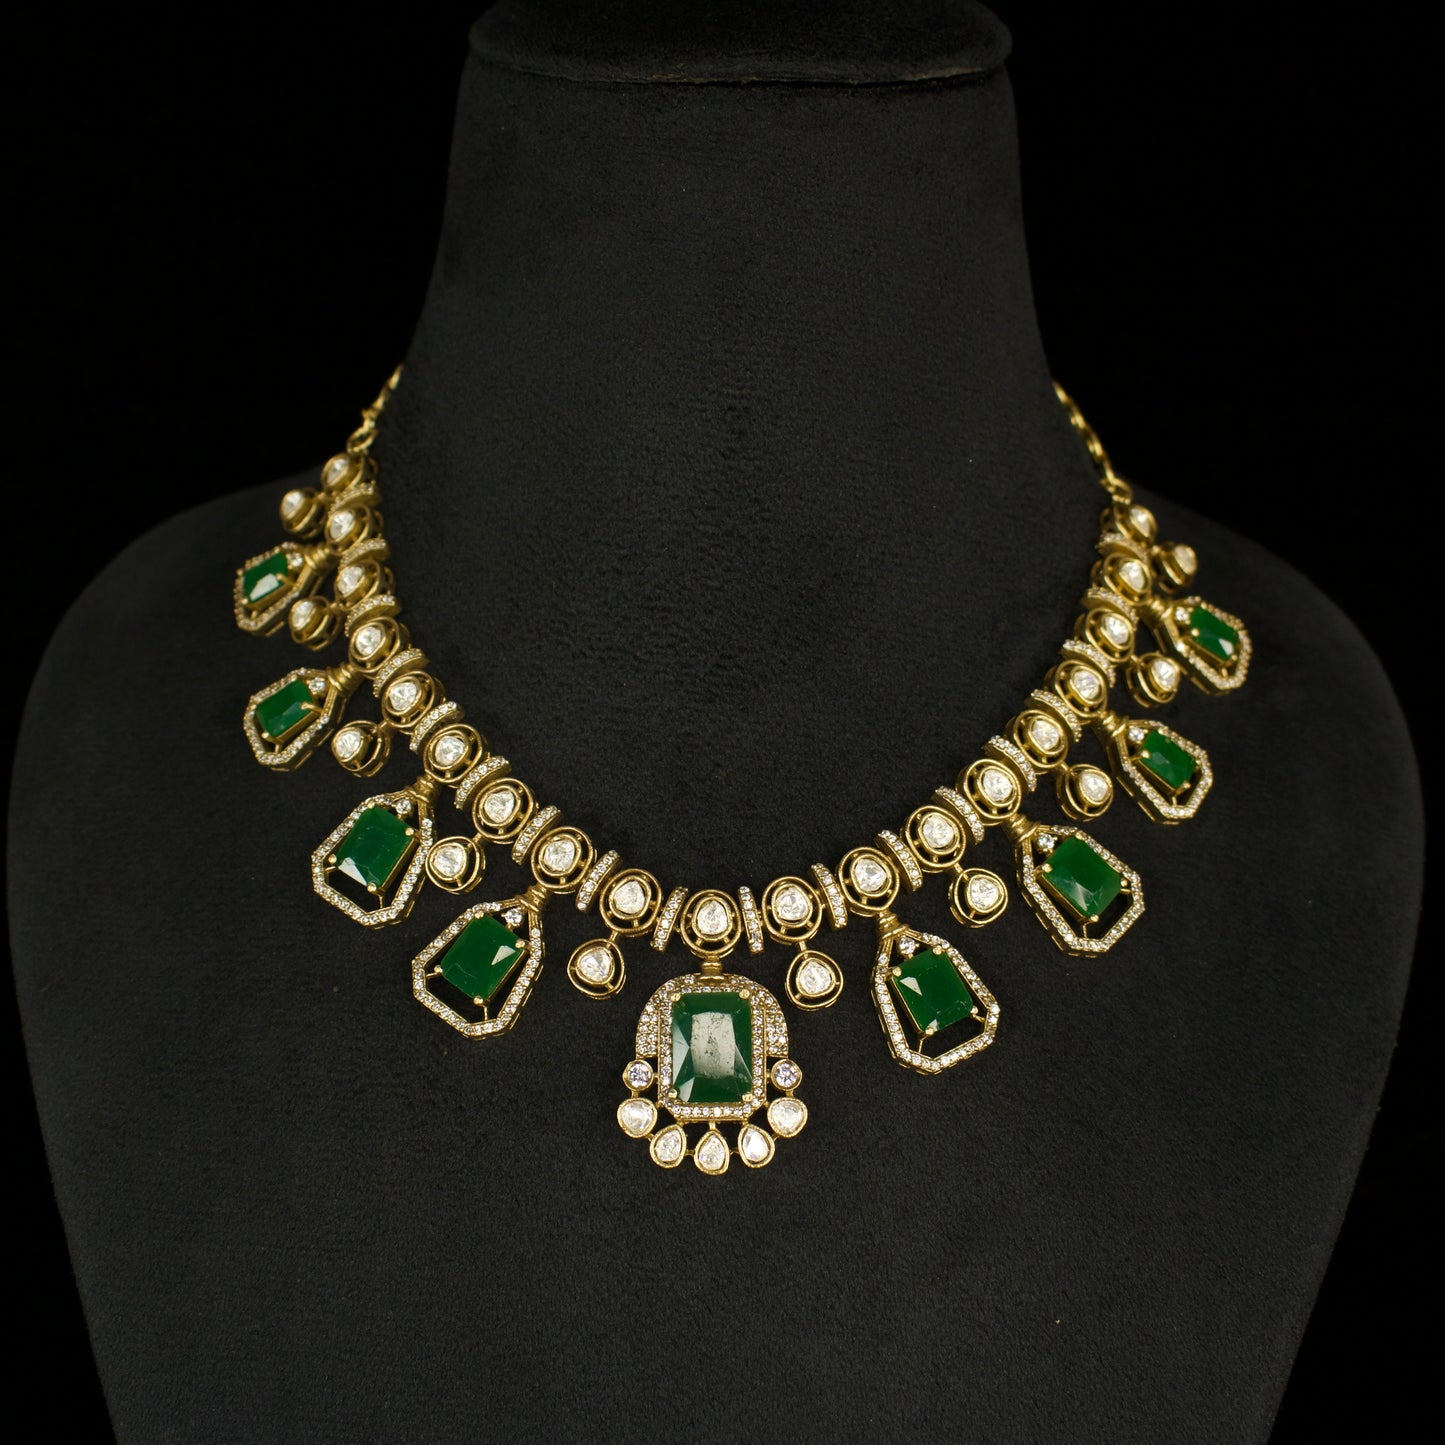 Elegant Square-cut Victorian Necklace with earrings